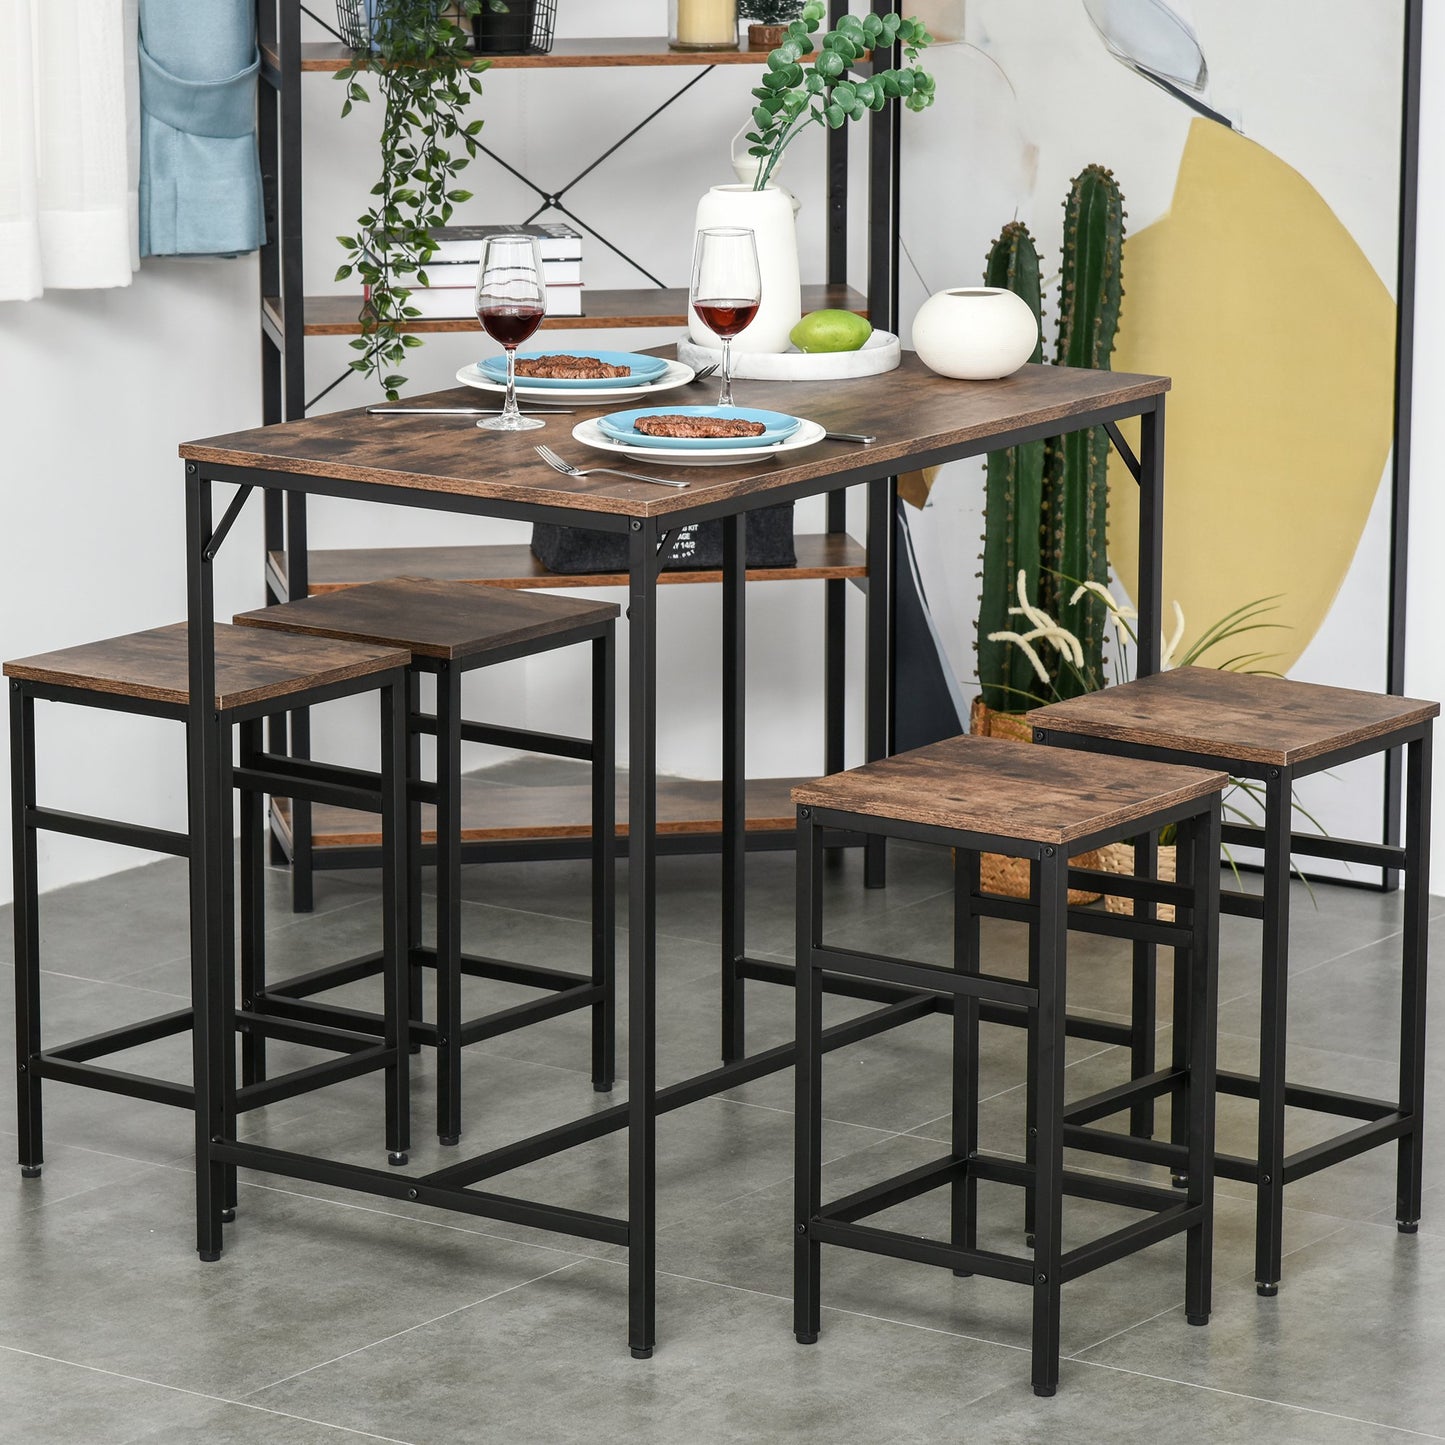 HOMCOM MDF Industrial 5-Piece Dining Set Dining Table with 4 Stools Black/Brown